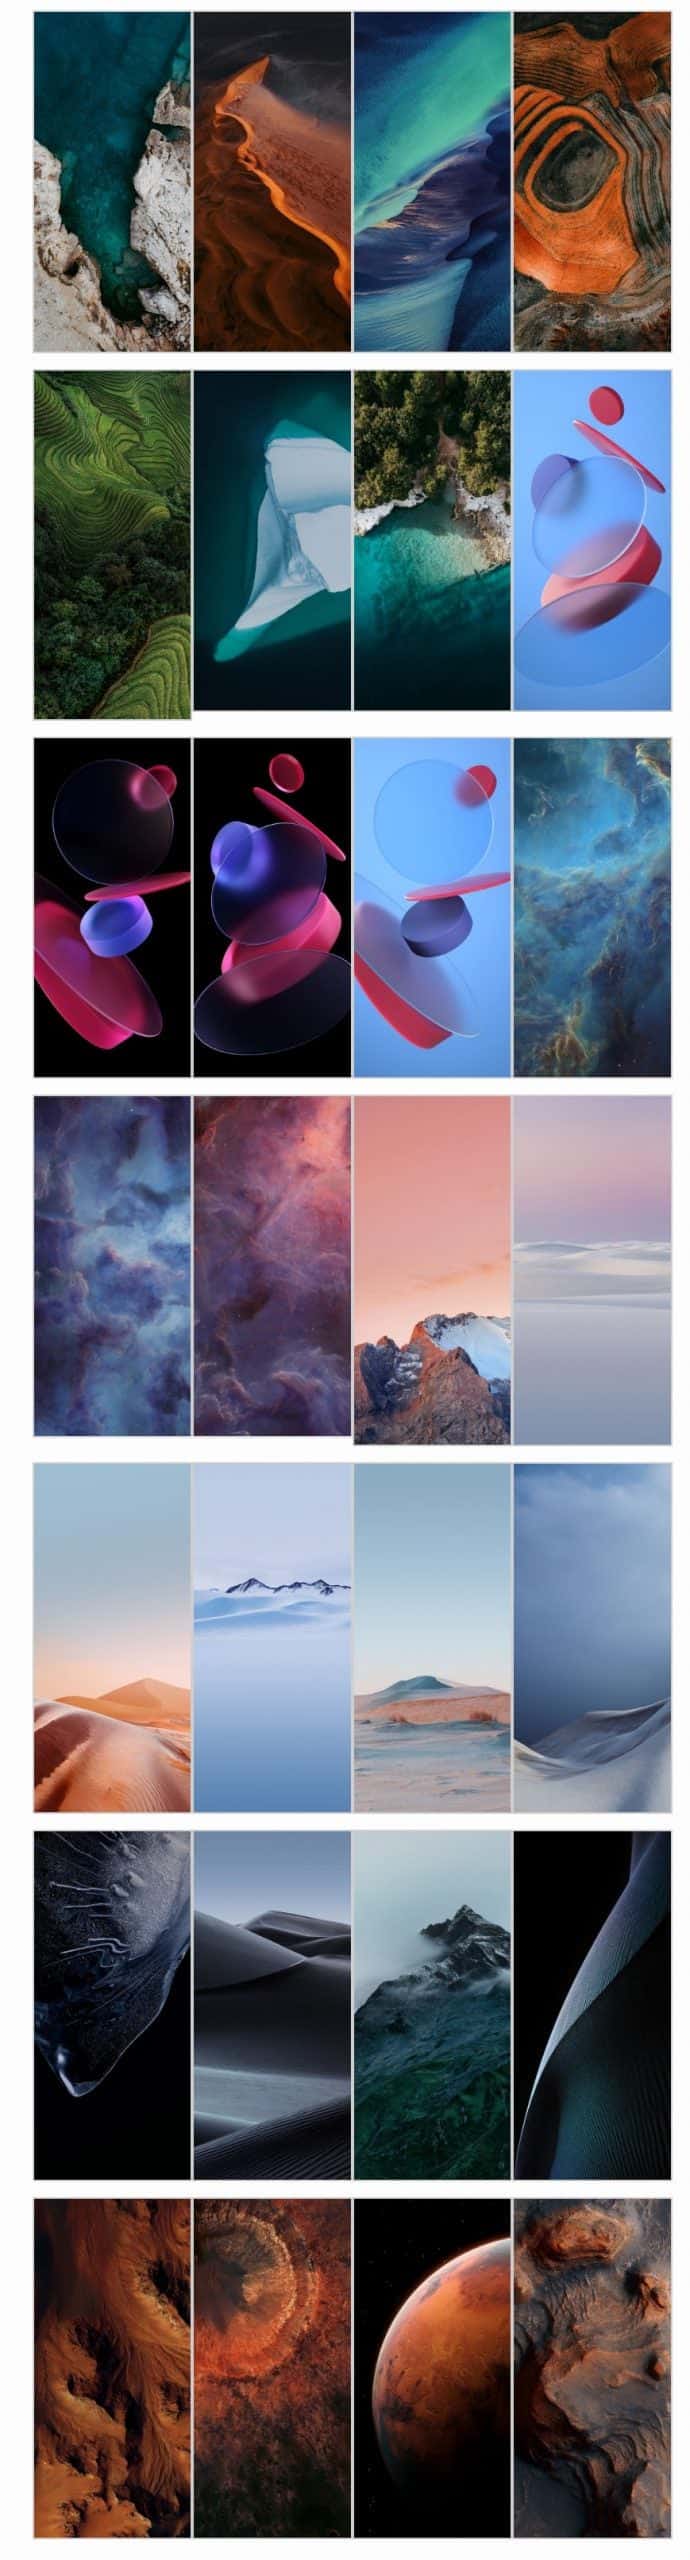 MIUI 12 download the new wallpapers in full resolution   Gizchinacom 690x2560